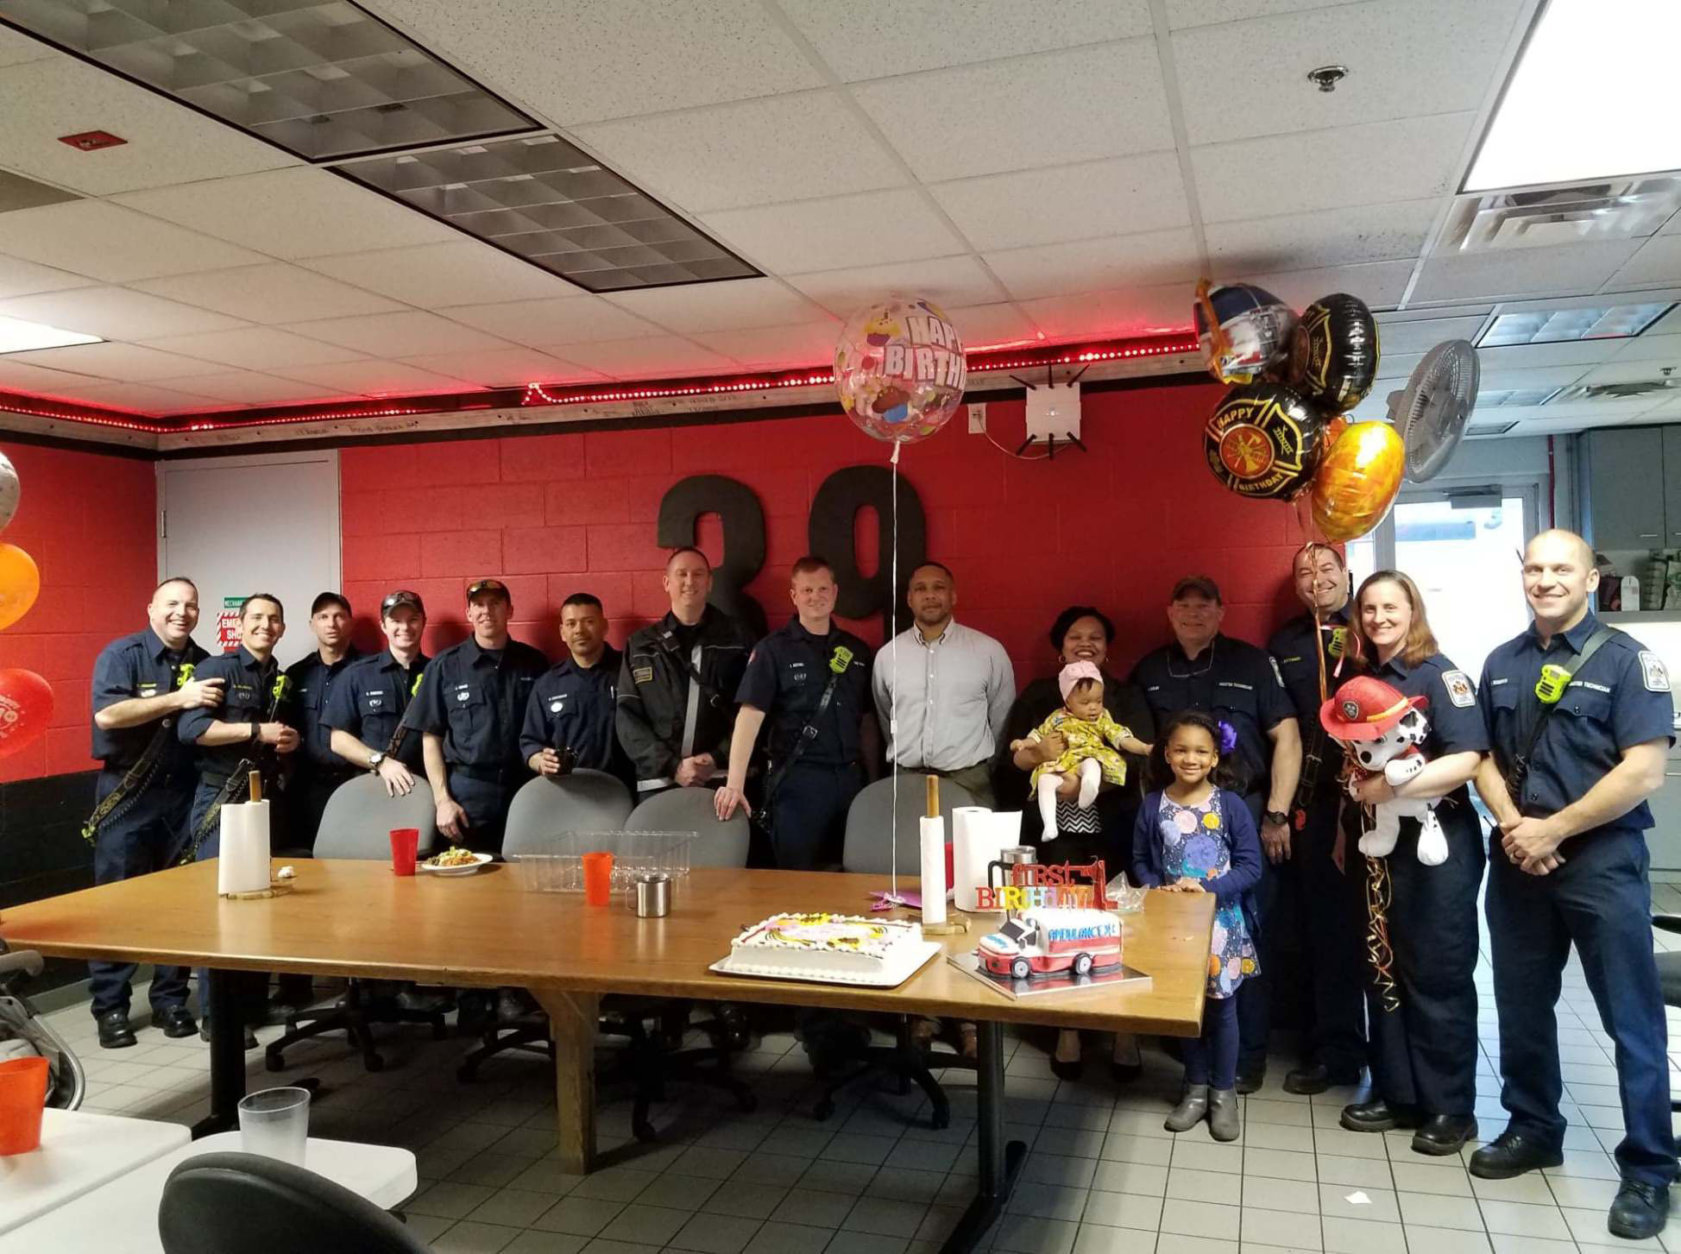 The family of baby Lauryn reached out to the firefighters from Station 39 in North Point who helped deliver her to include them in the birthday celebration. (Courtesy Fairfax County Fire and Rescue)